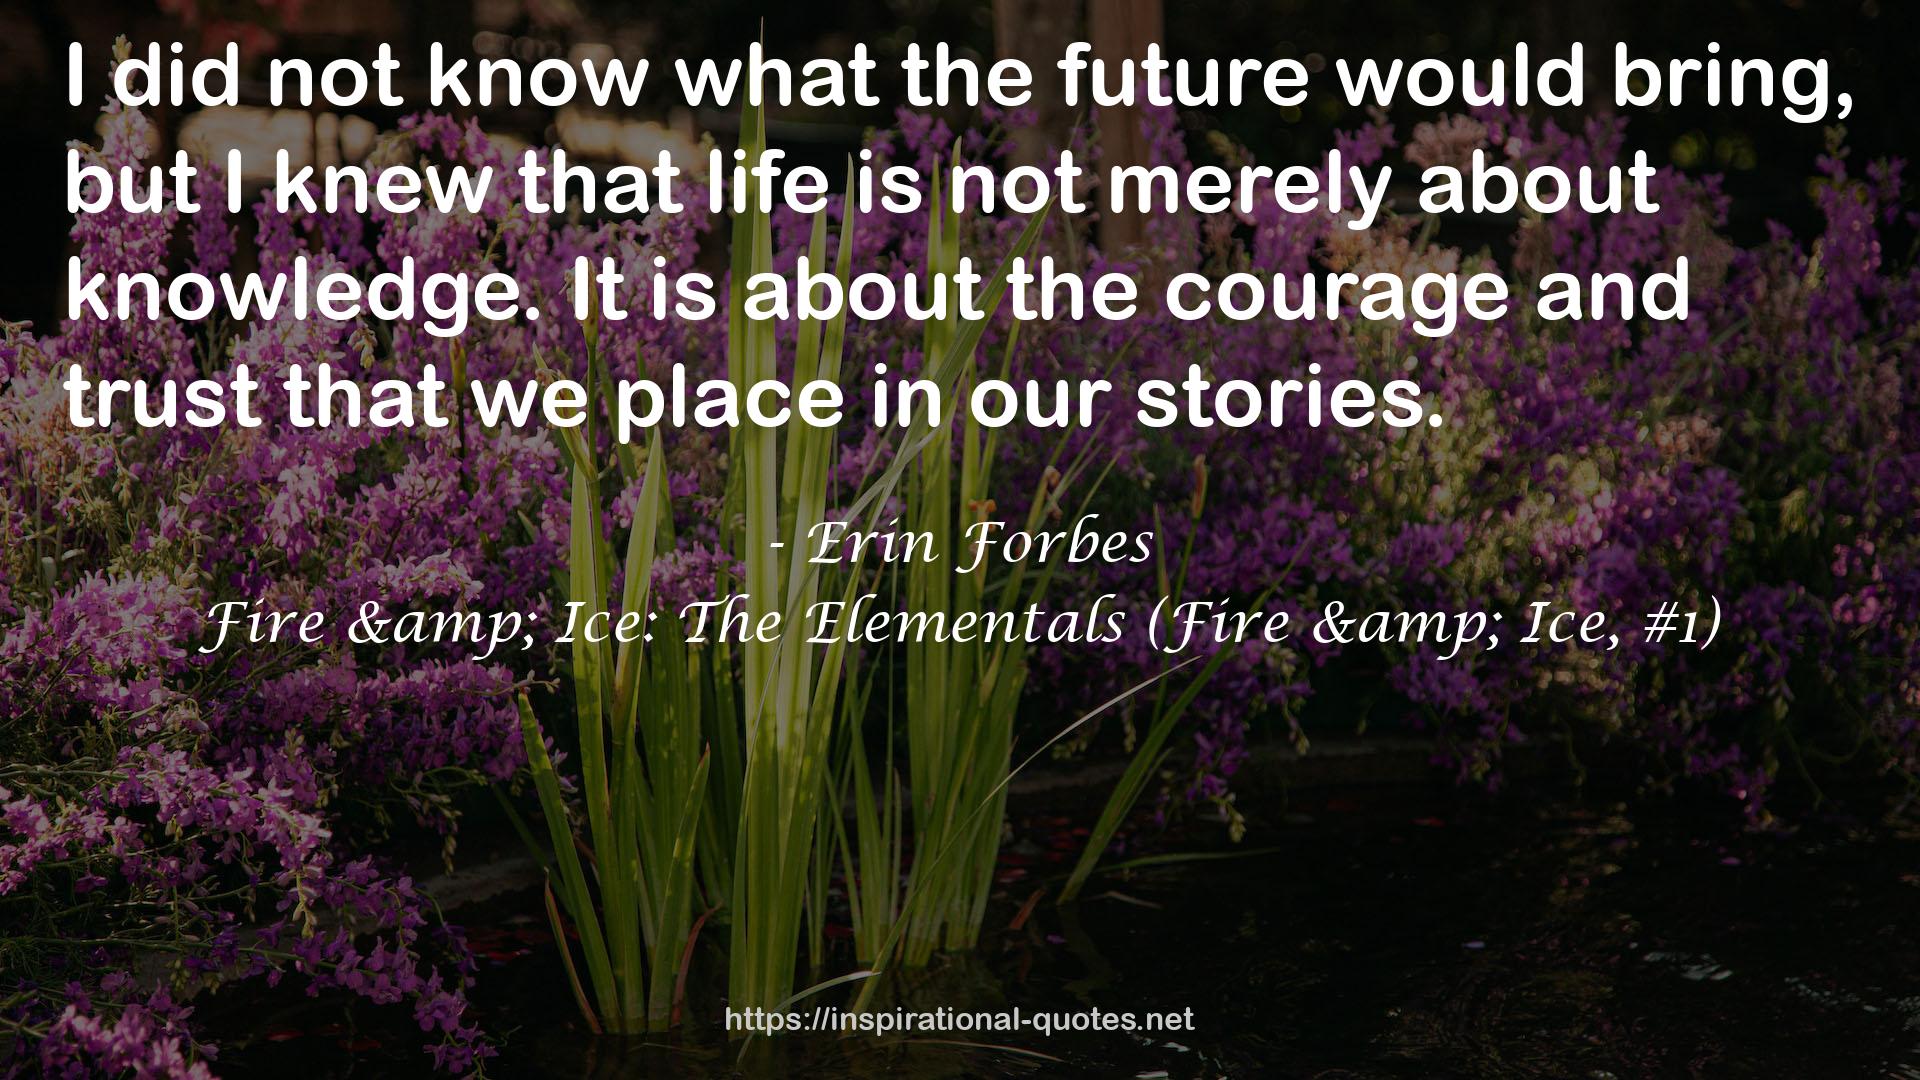 Erin Forbes QUOTES